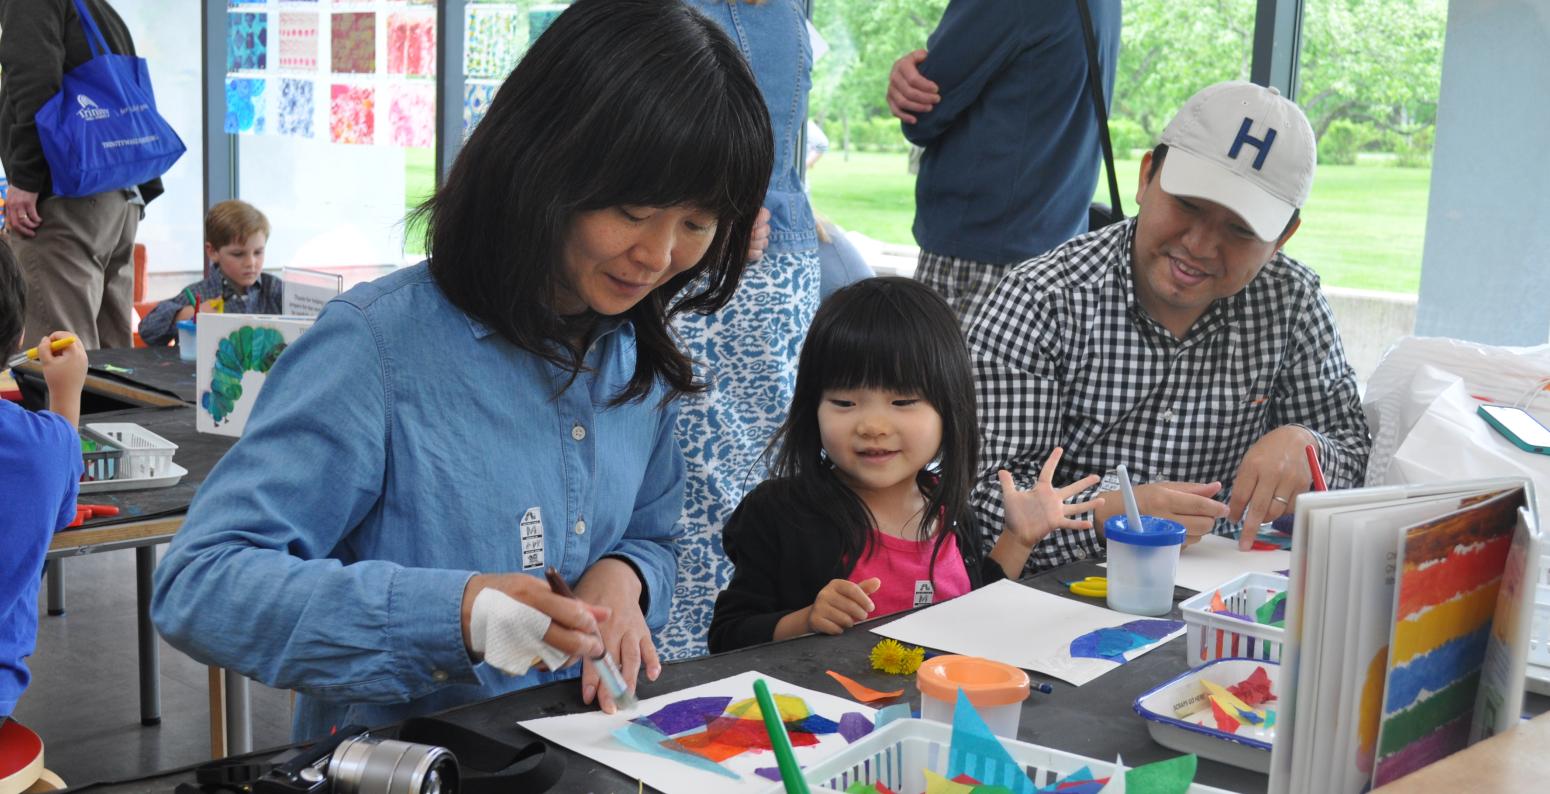 A family sits in the Art Studio making collage art creations.